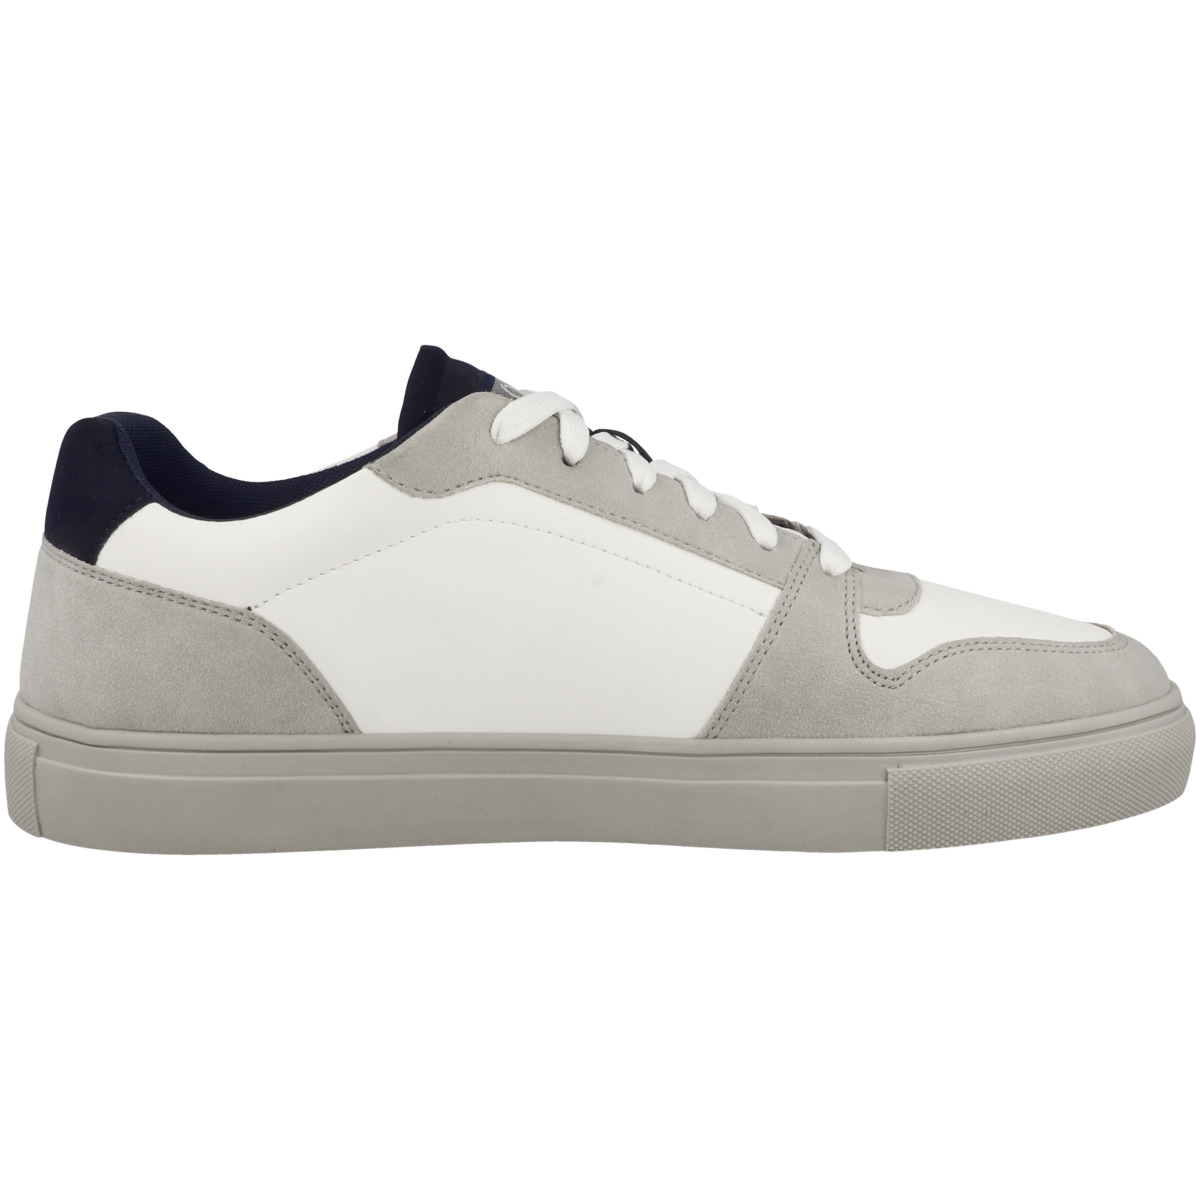 s.Oliver 5-13602-39 Sneaker weiss